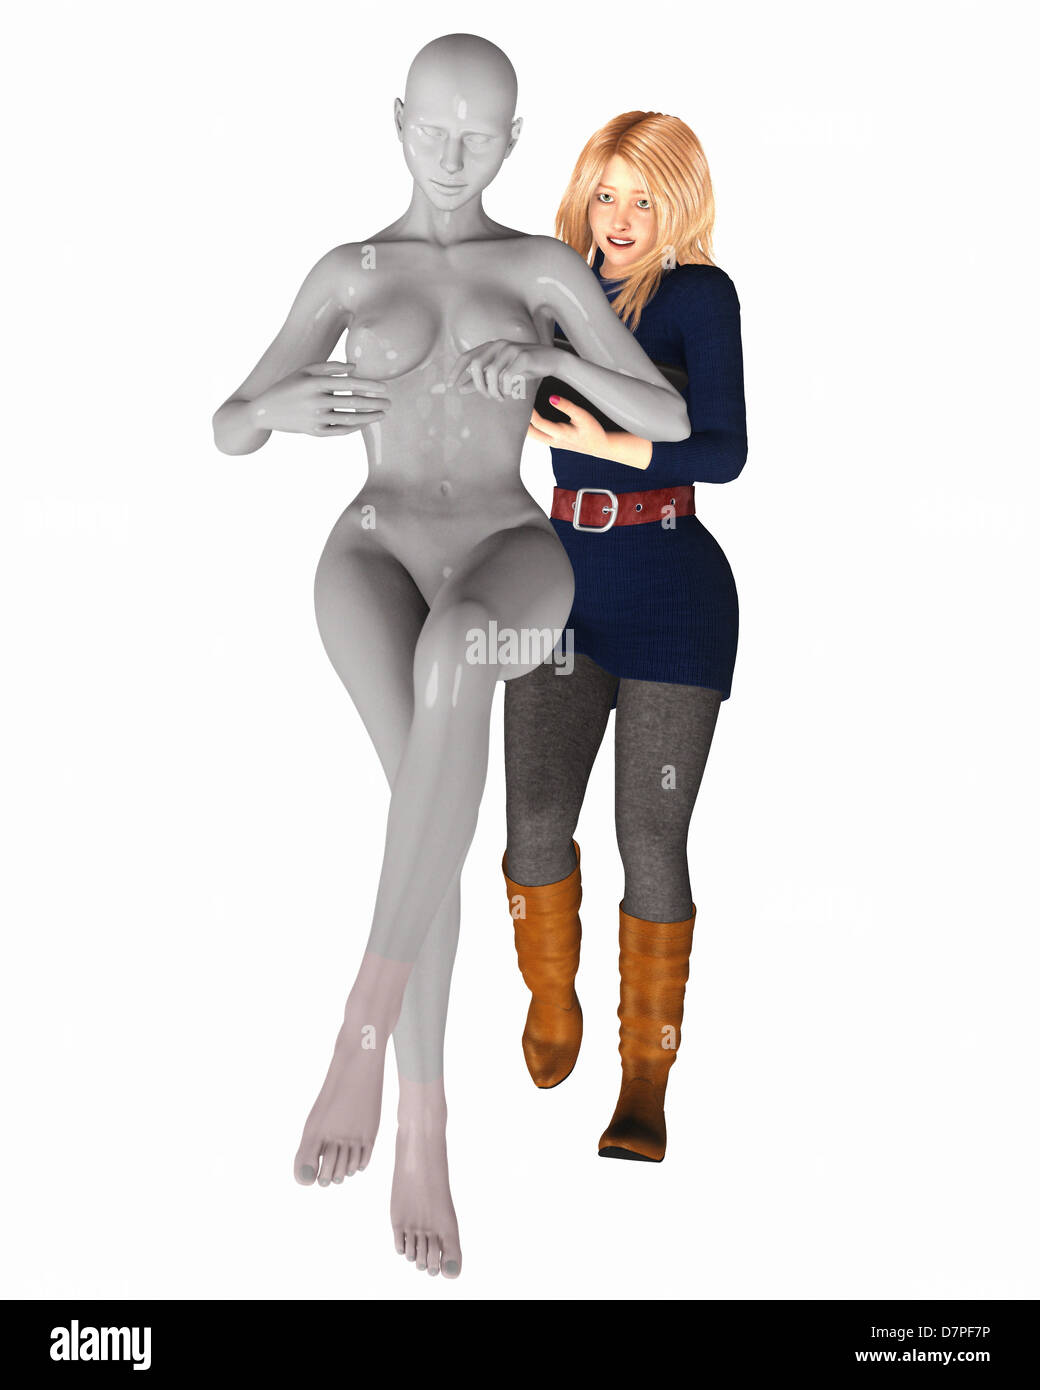 Shop girl and Mannequin Stock Photo